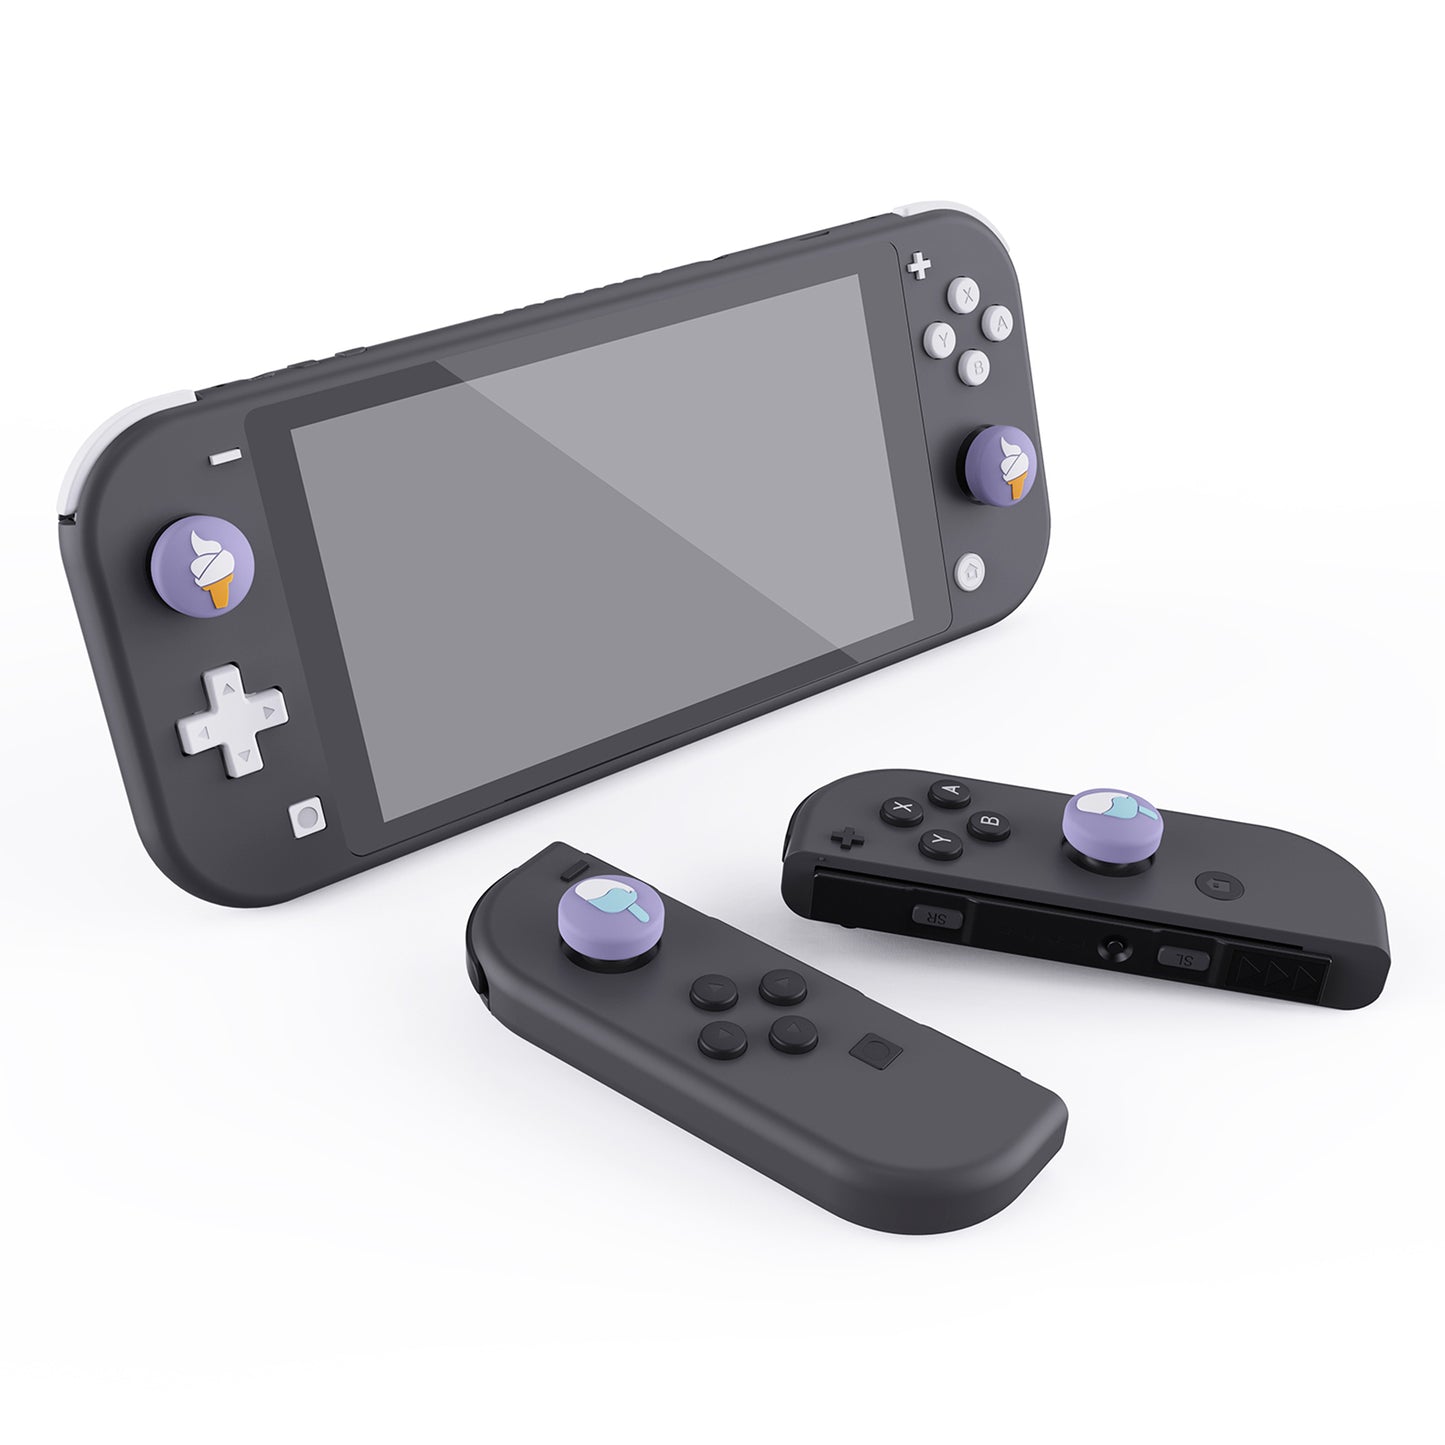 PlayVital Ice Cream Cute Switch Thumb Grip Caps, Joystick Caps for Nintendo Switch Lite, Silicone Analog Cover Thumbstick Grips for Switch OLED Joycon - Light Violet - NJM1105 playvital